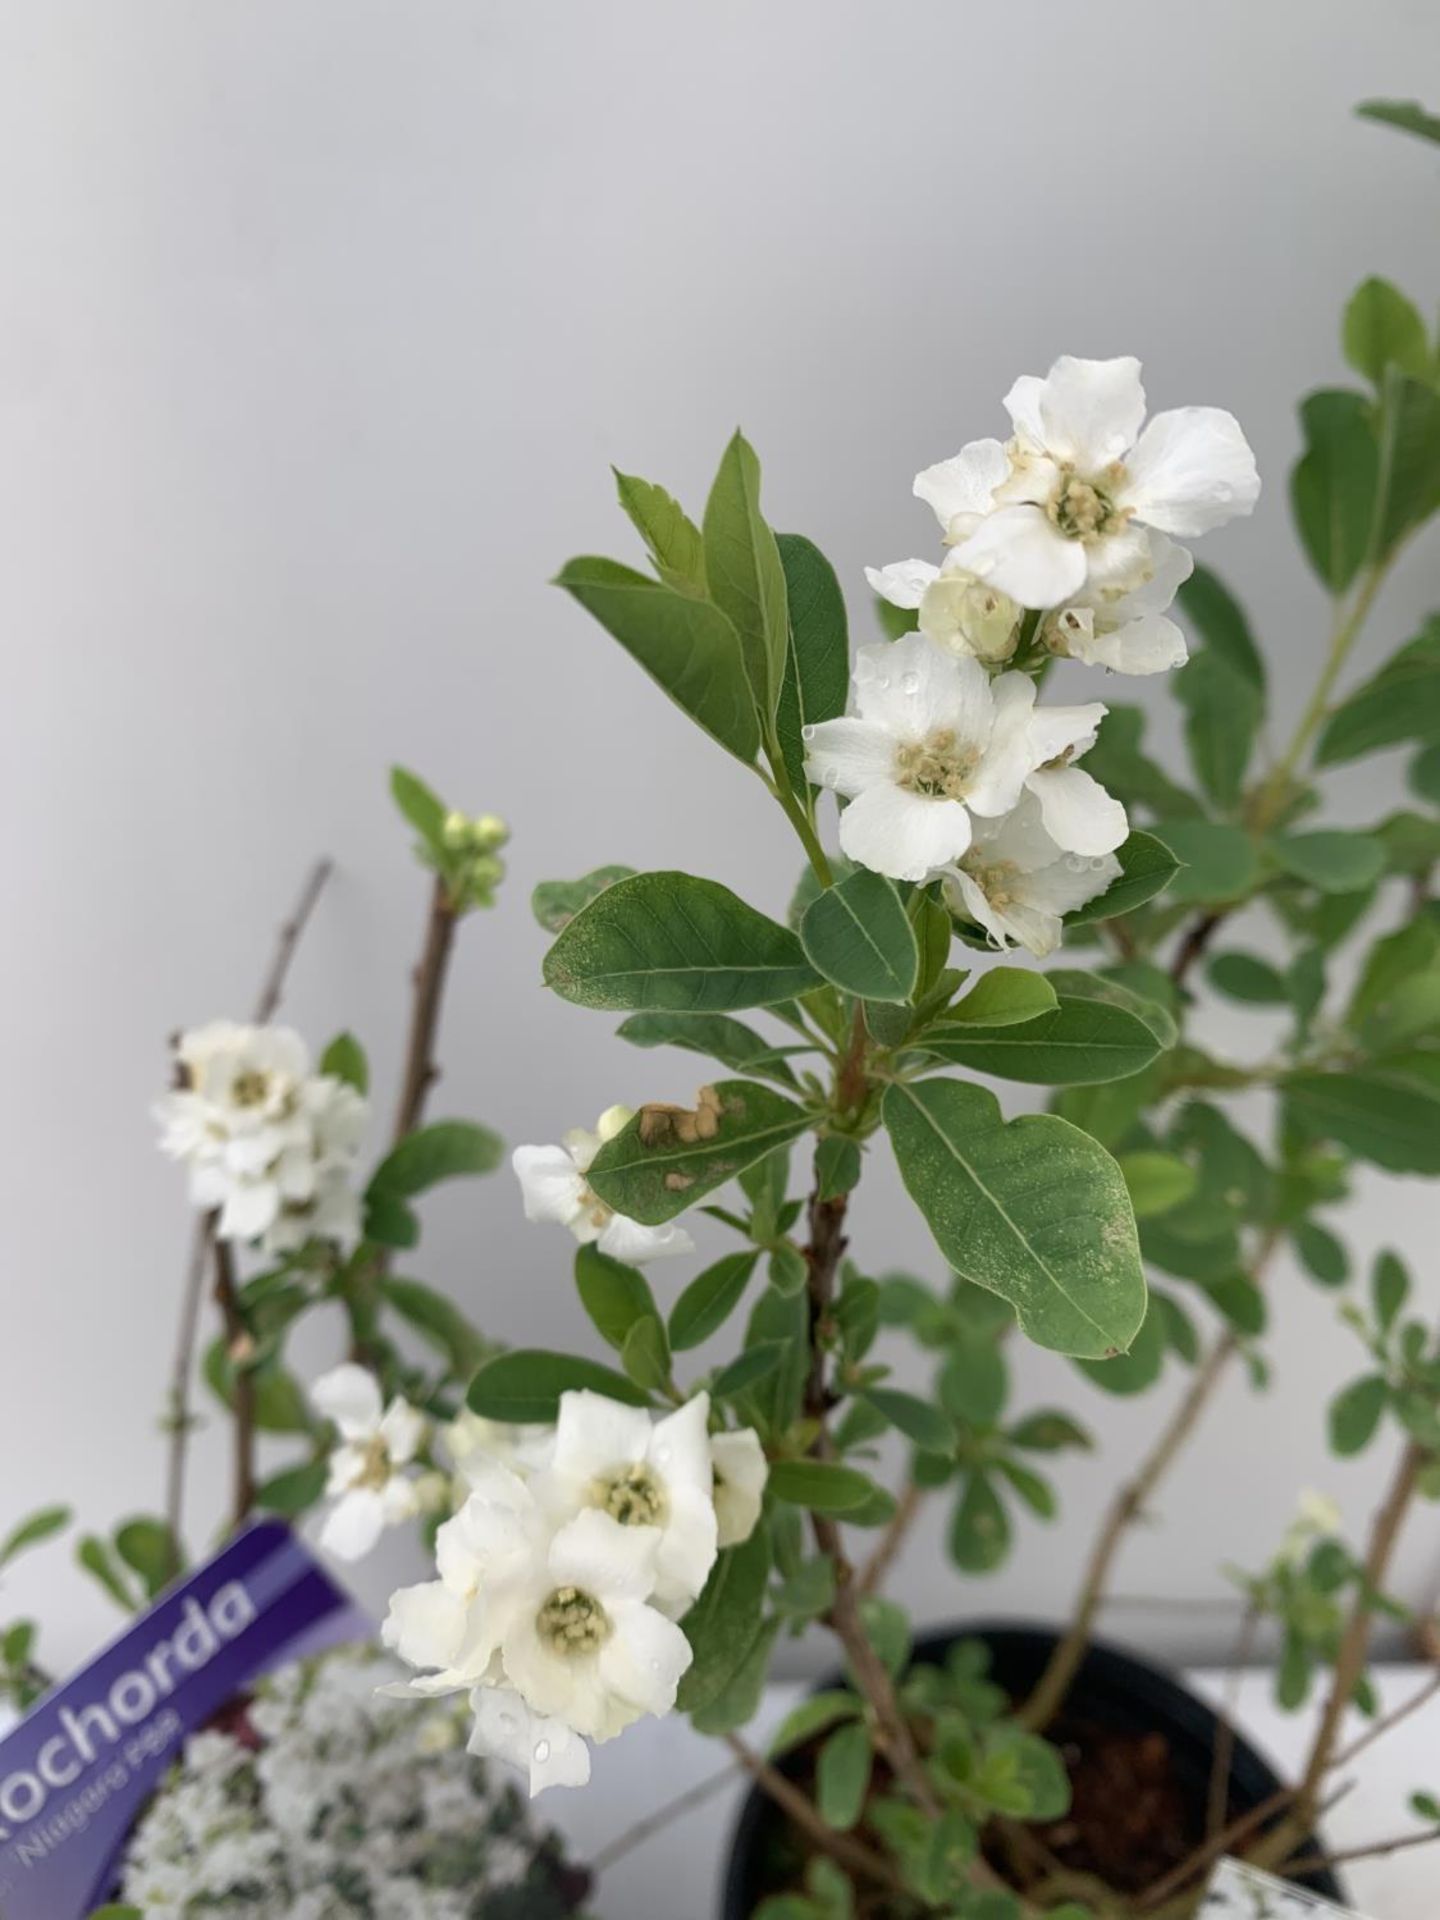 TWO EXOCHORDA RACEMOSA 'NIAGARA' IN 2 LTR POTS APPROX 65CM IN HEIGHT PLUS VAT TO BE SOLD FOR THE TWO - Image 11 of 11